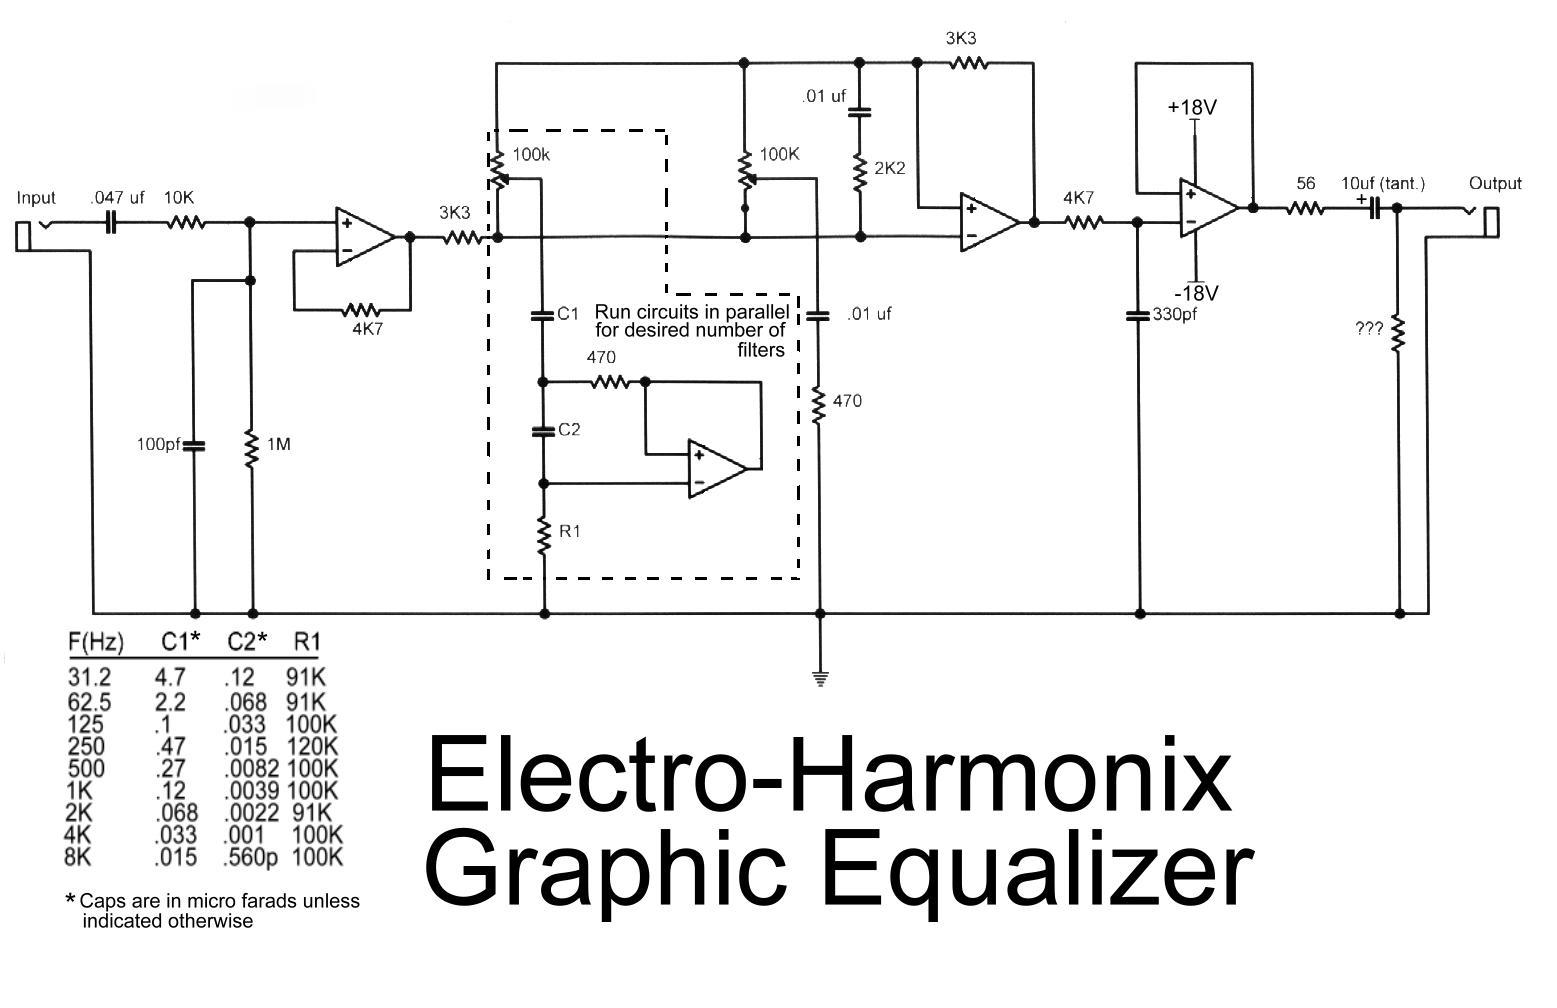 10 Band Equalizer Circuit Diagram - 5 Band Graphic Equaliser  C2 B7 Electro Harmonix Graphic Equalizer - 10 Band Equalizer Circuit Diagram